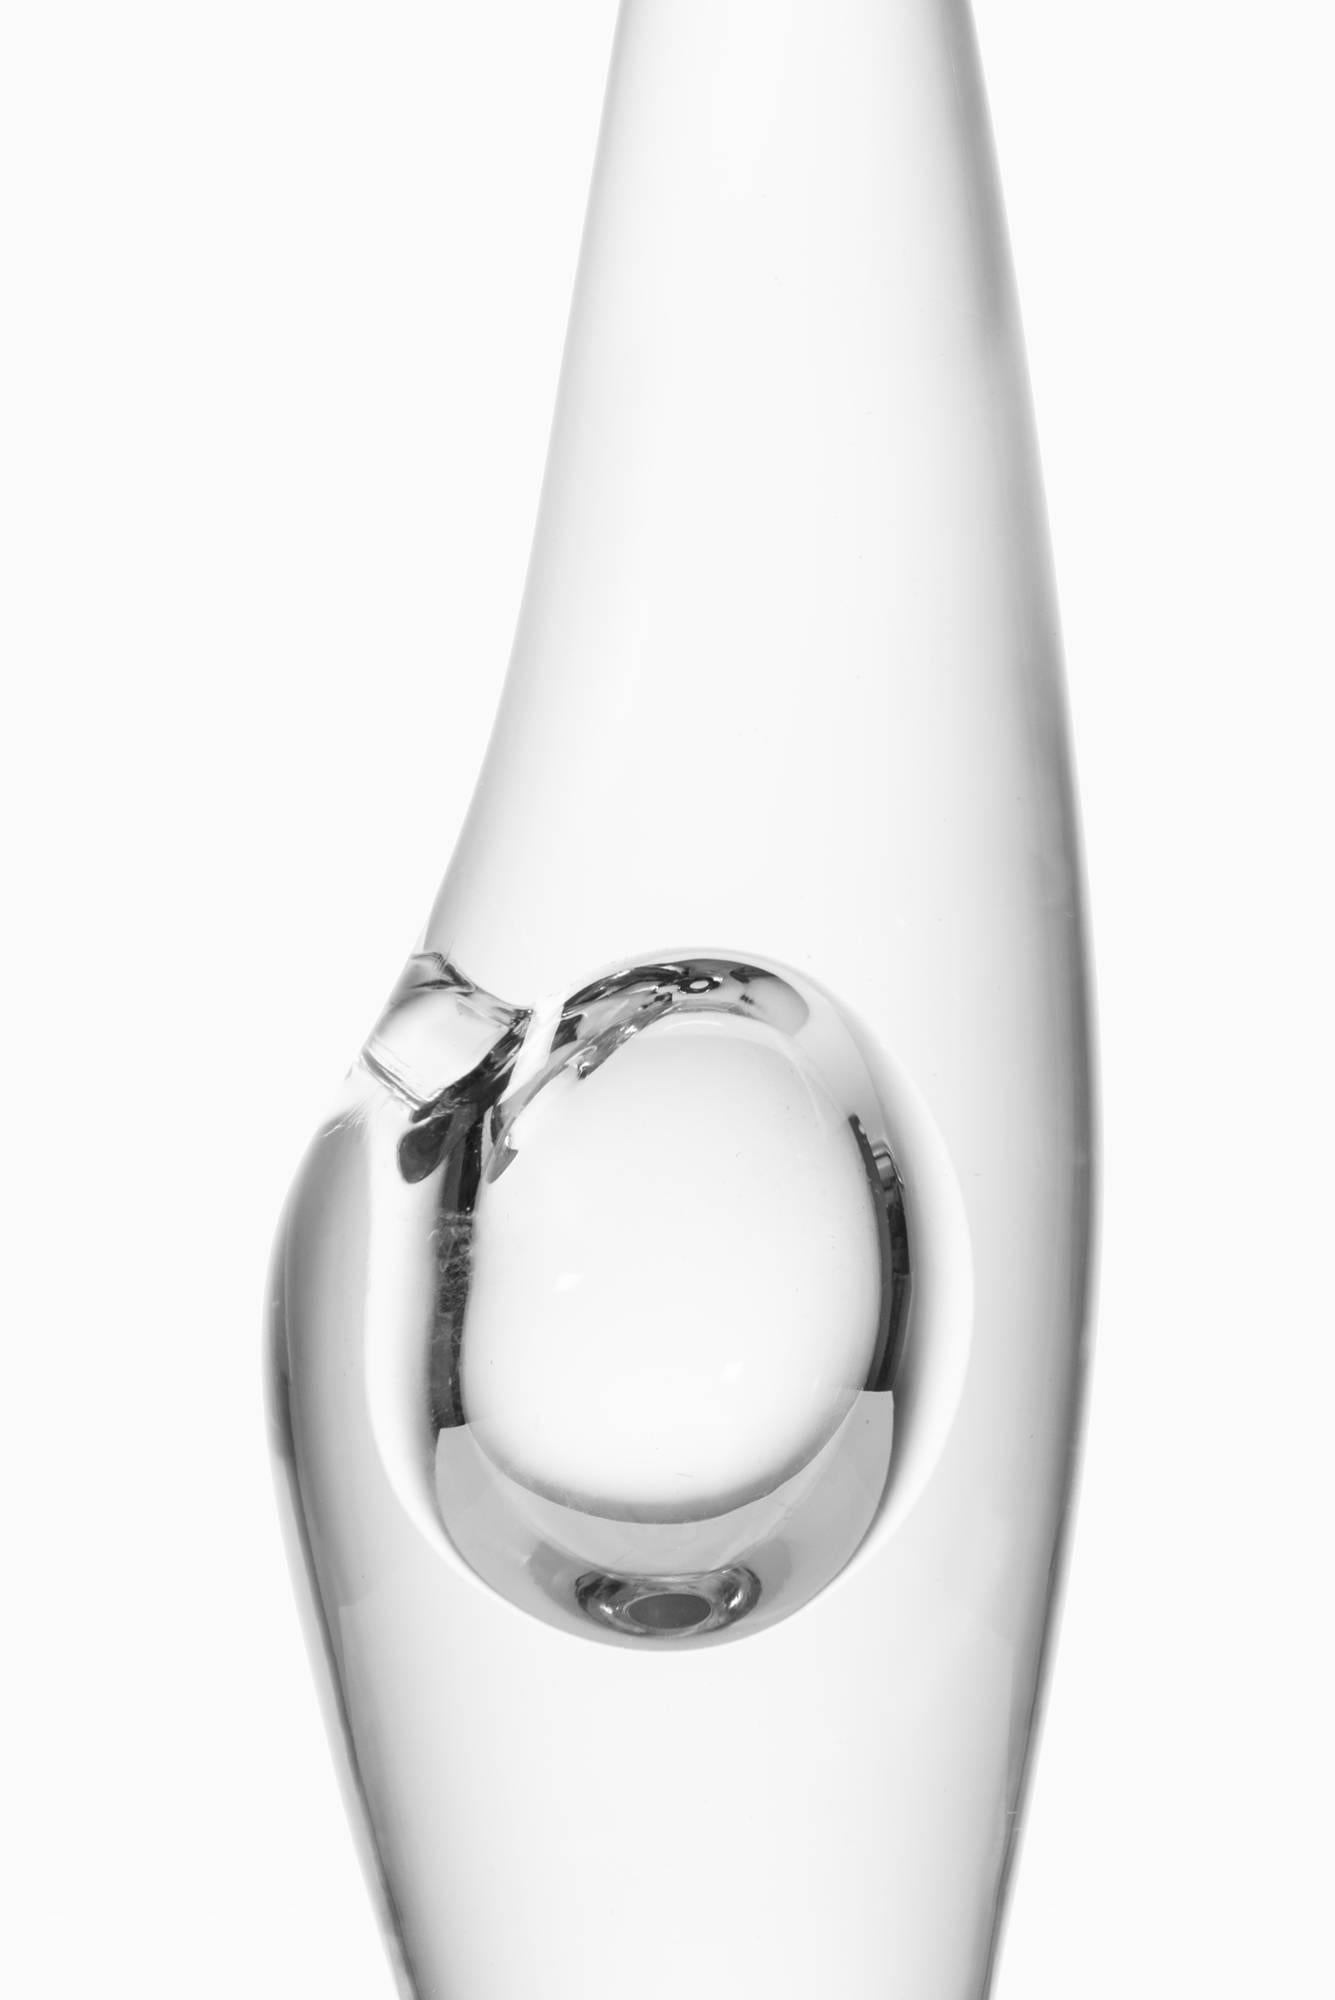 Glass vases model Orchid designed by Timo Sarpaneva. Produced by Iittala in Finland.